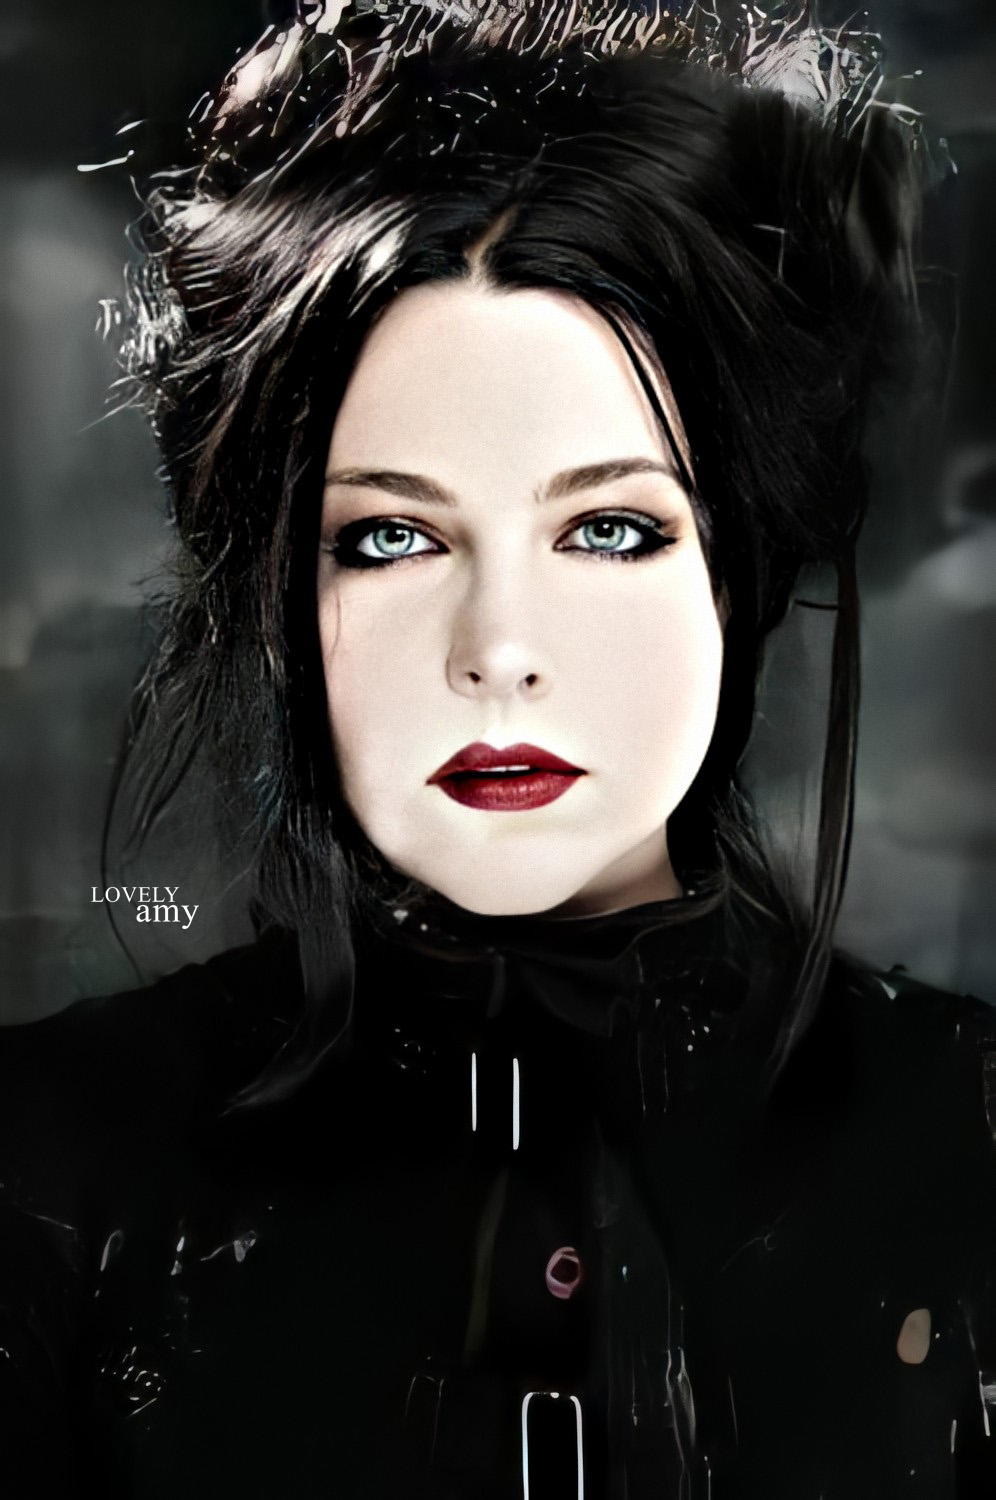 996x1500
Keywords: amy lee;photoshoot;the open door;black and white